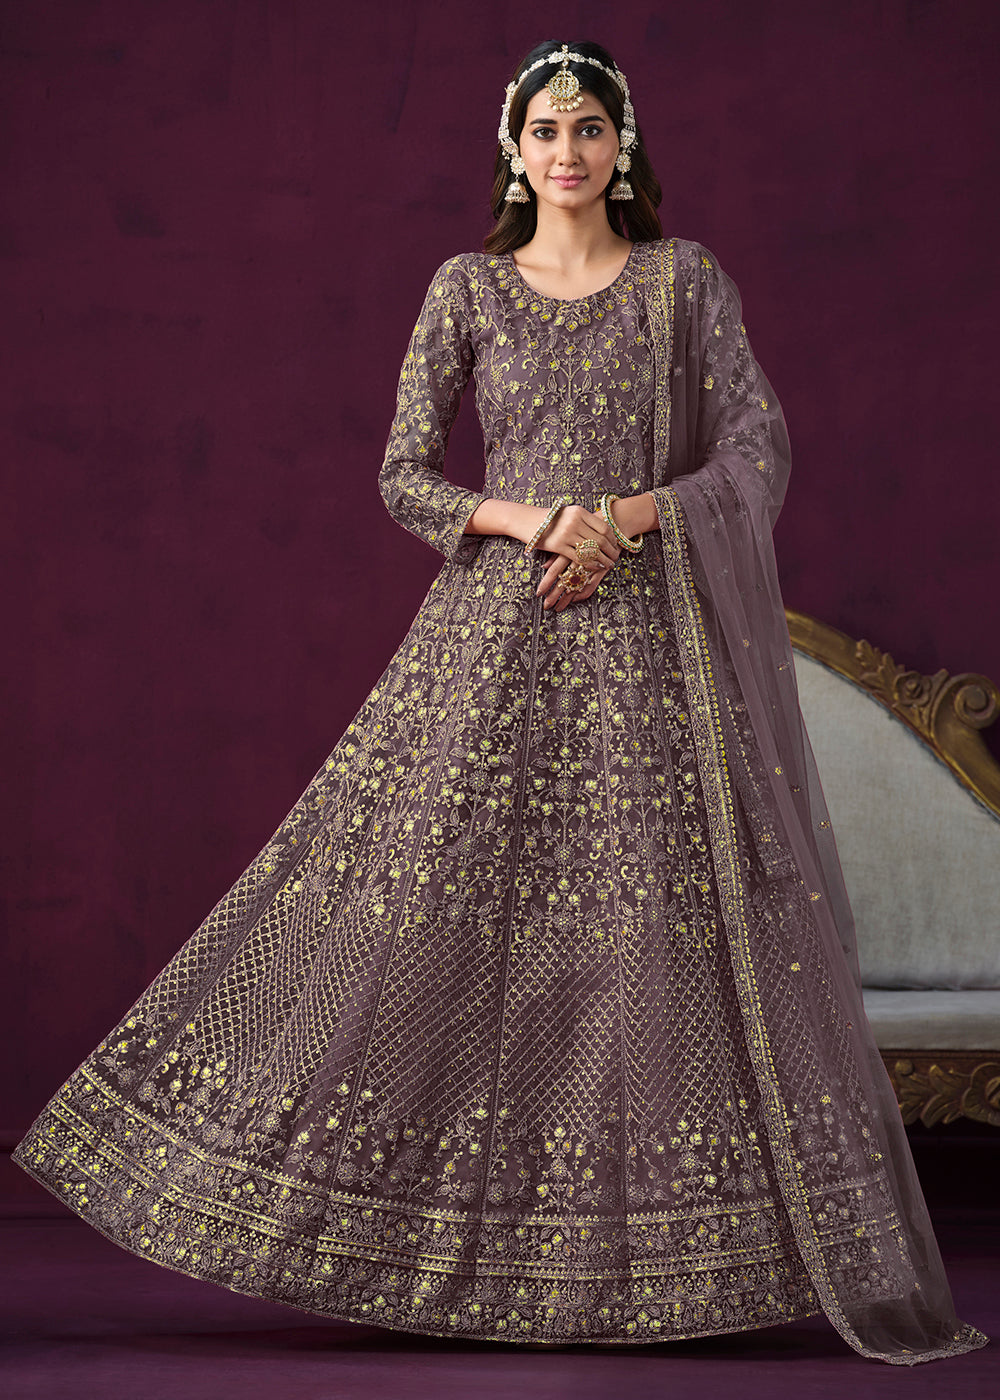 Buy Now Charming Purple Embroidered Net Floor Length Anarkali Suit Online in USA, UK, Australia, New Zealand, Canada & Worldwide at Empress Clothing.